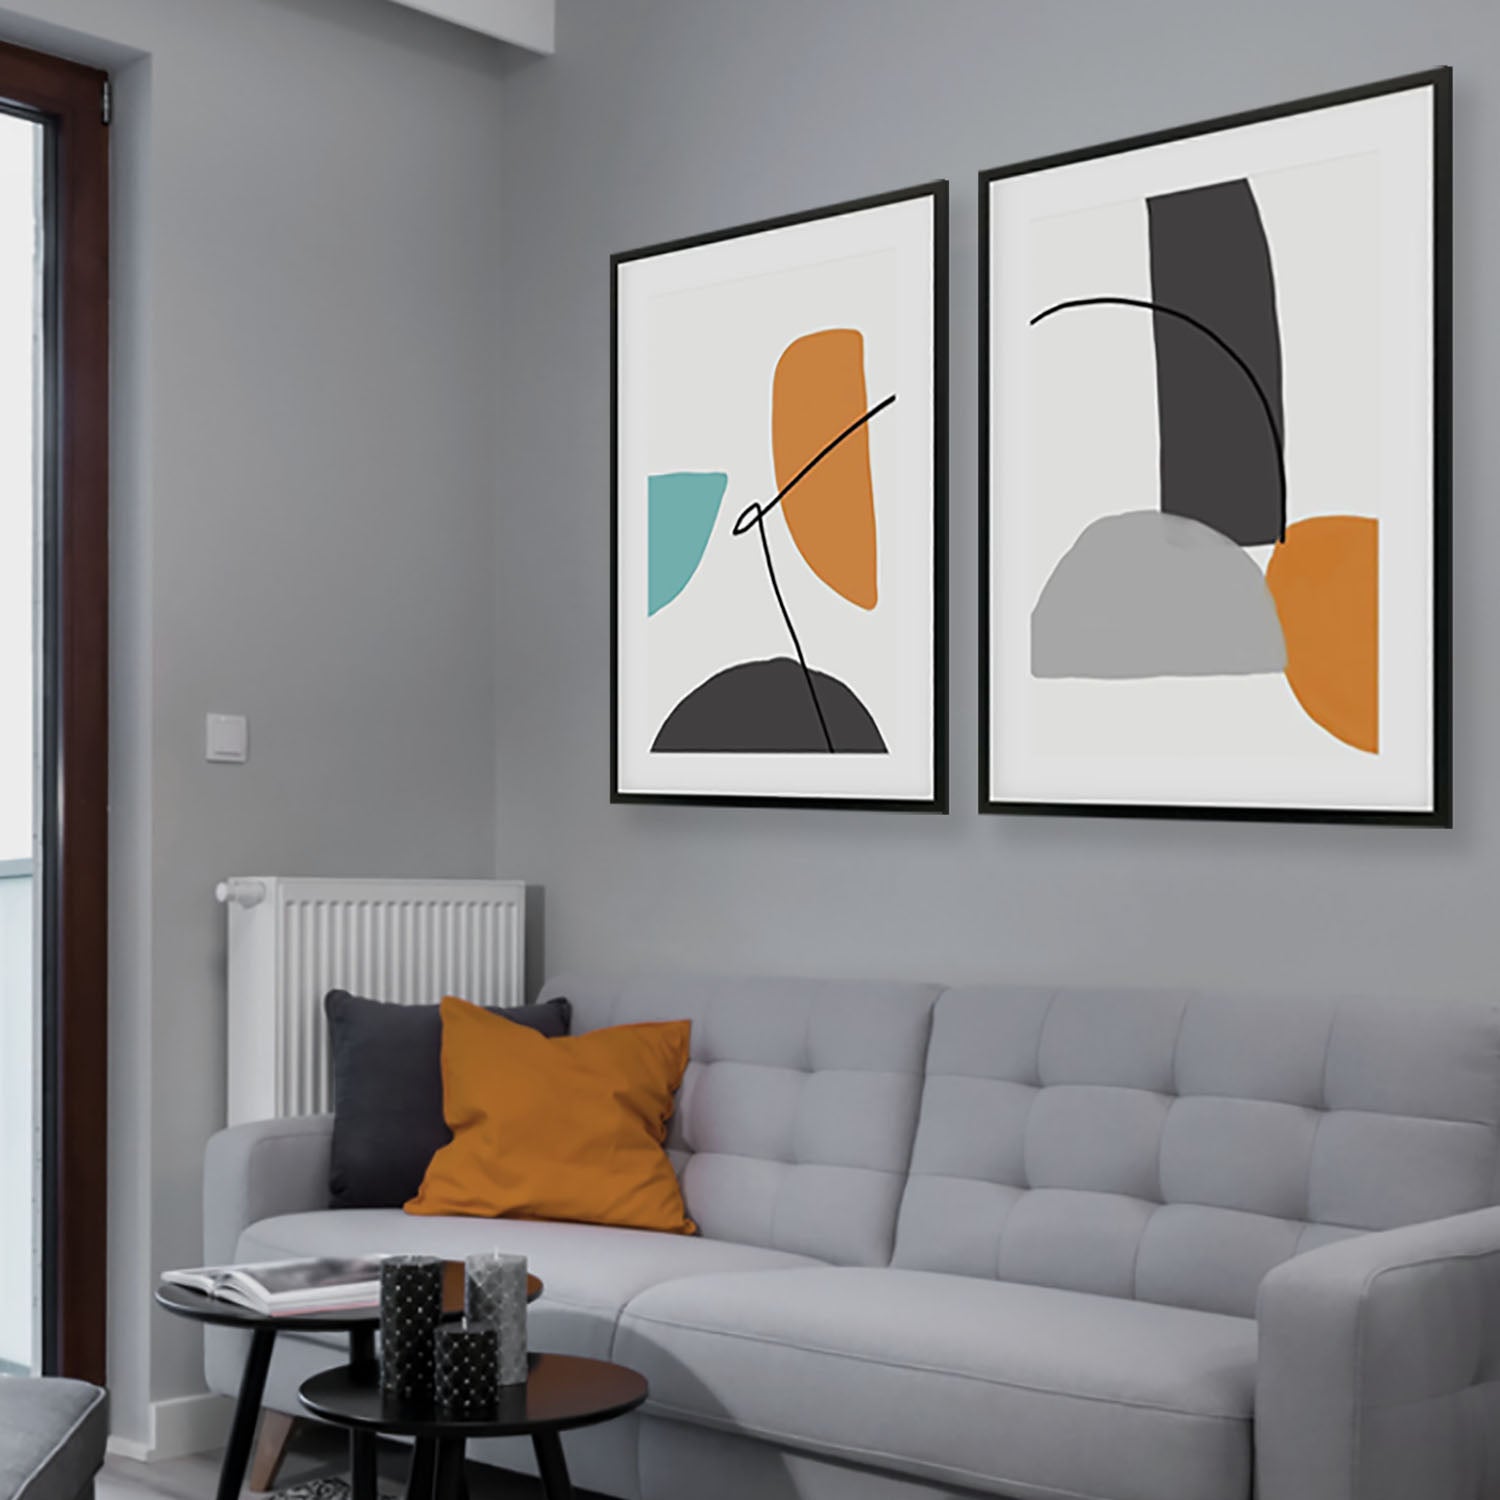 Grey And Orange Shapes - Print Set Of 2-framed-Wall Art Print Set Of 2-Abstract House